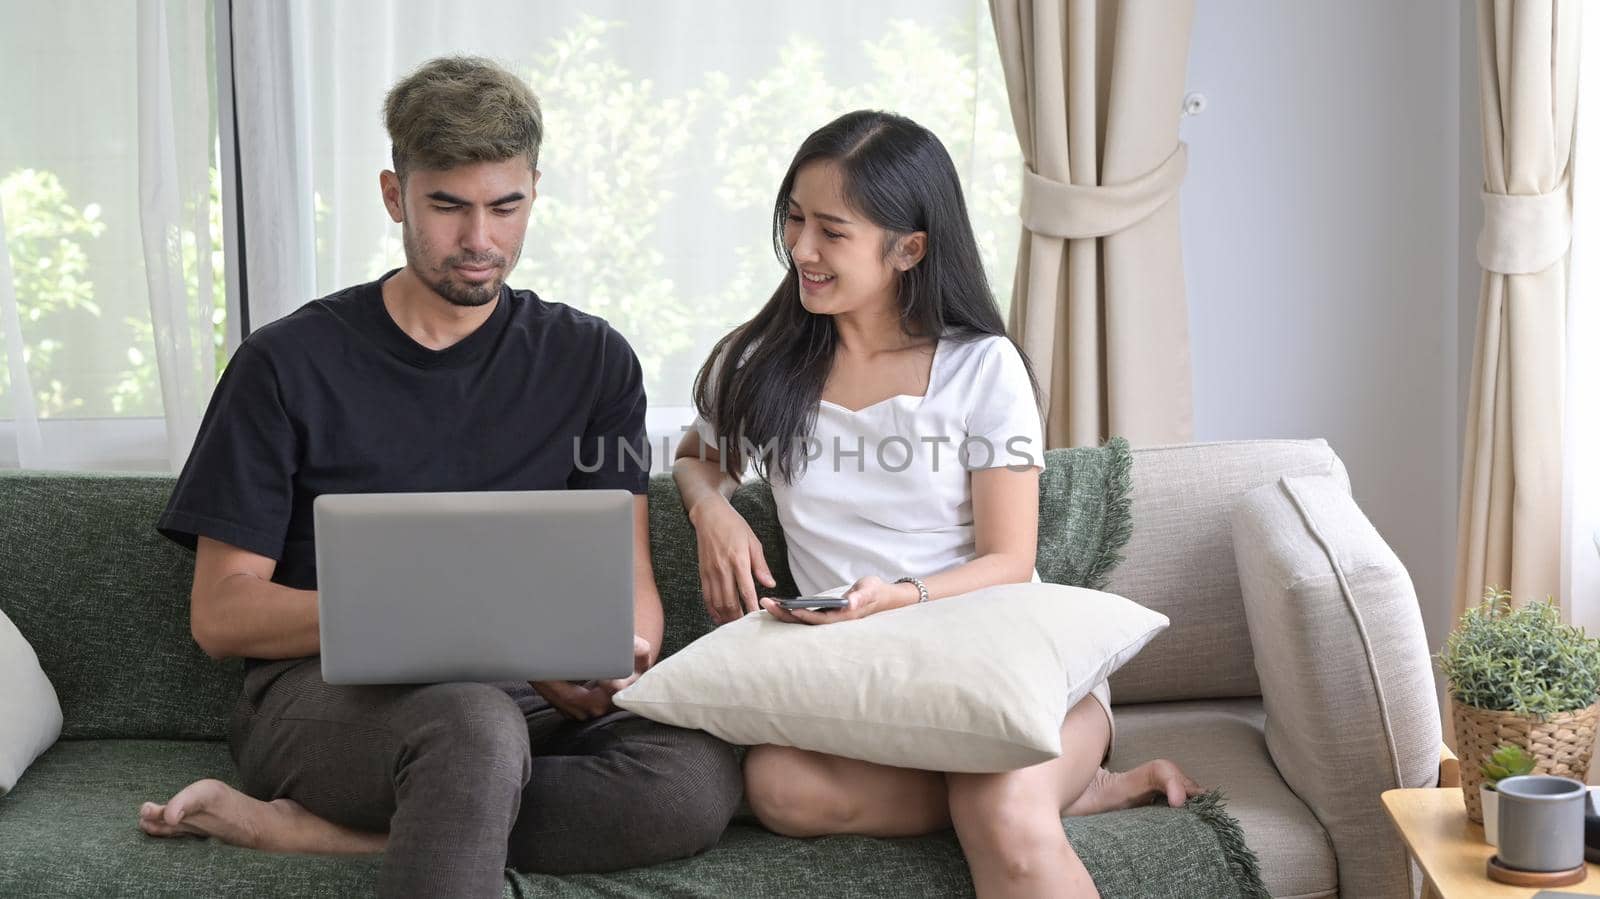 Loving asian couple relaxing on comfortable couch and surfing internet with computer laptop together.